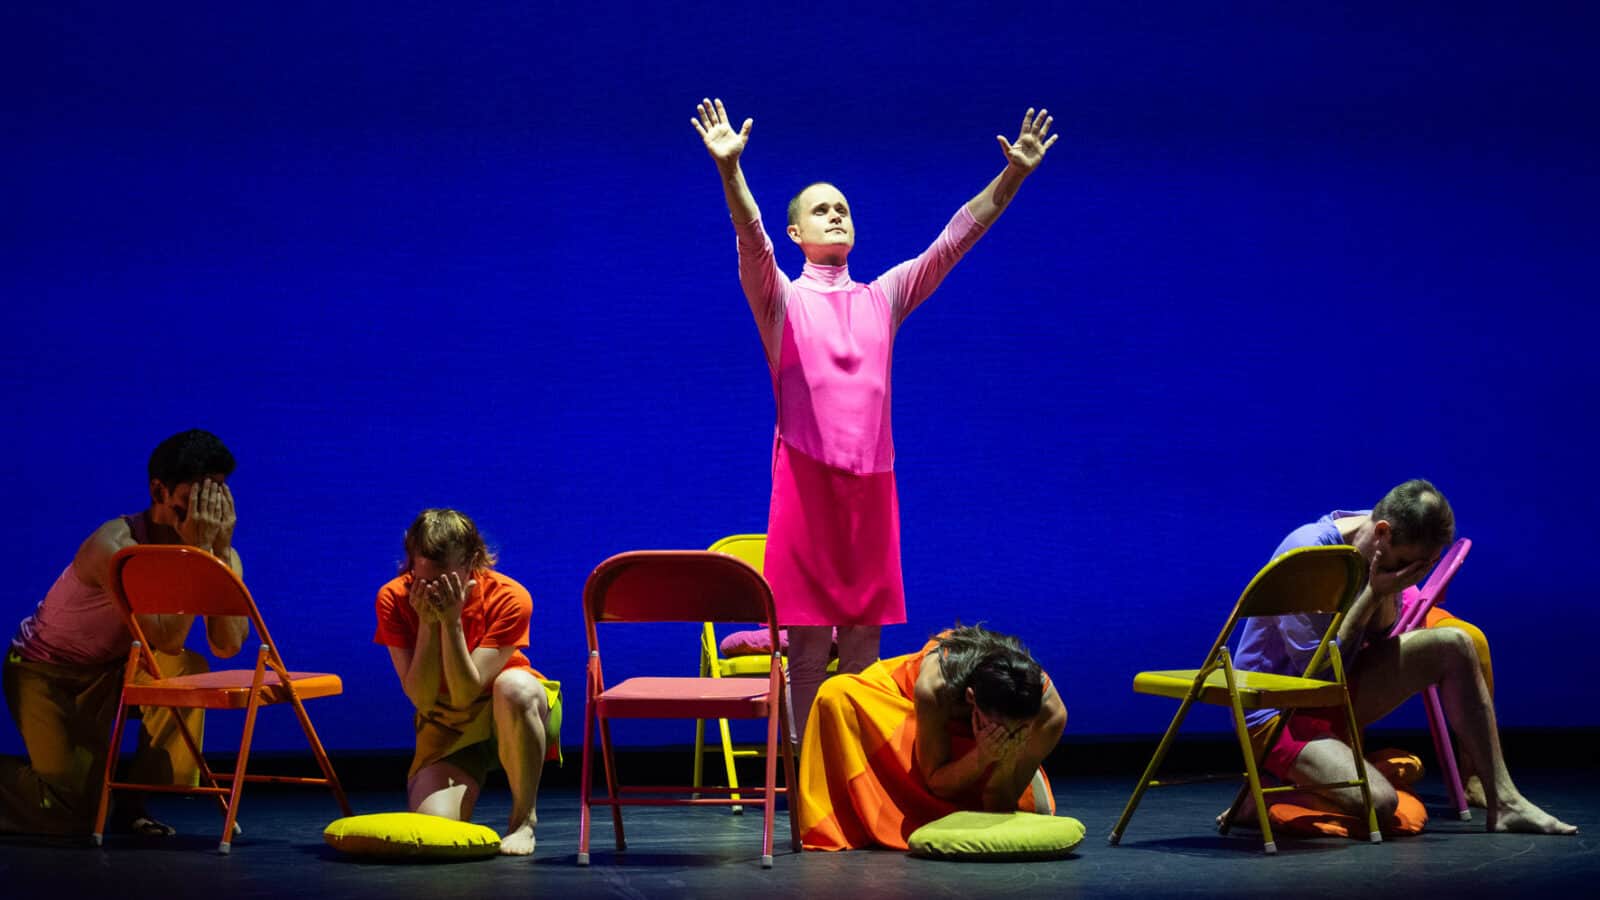 Dallas McMurray stands in a circle of listeners with his arms spread wide in Mark Morris' The Look of Love. Photo courtesy of Jacob's Pillow Dance Festival